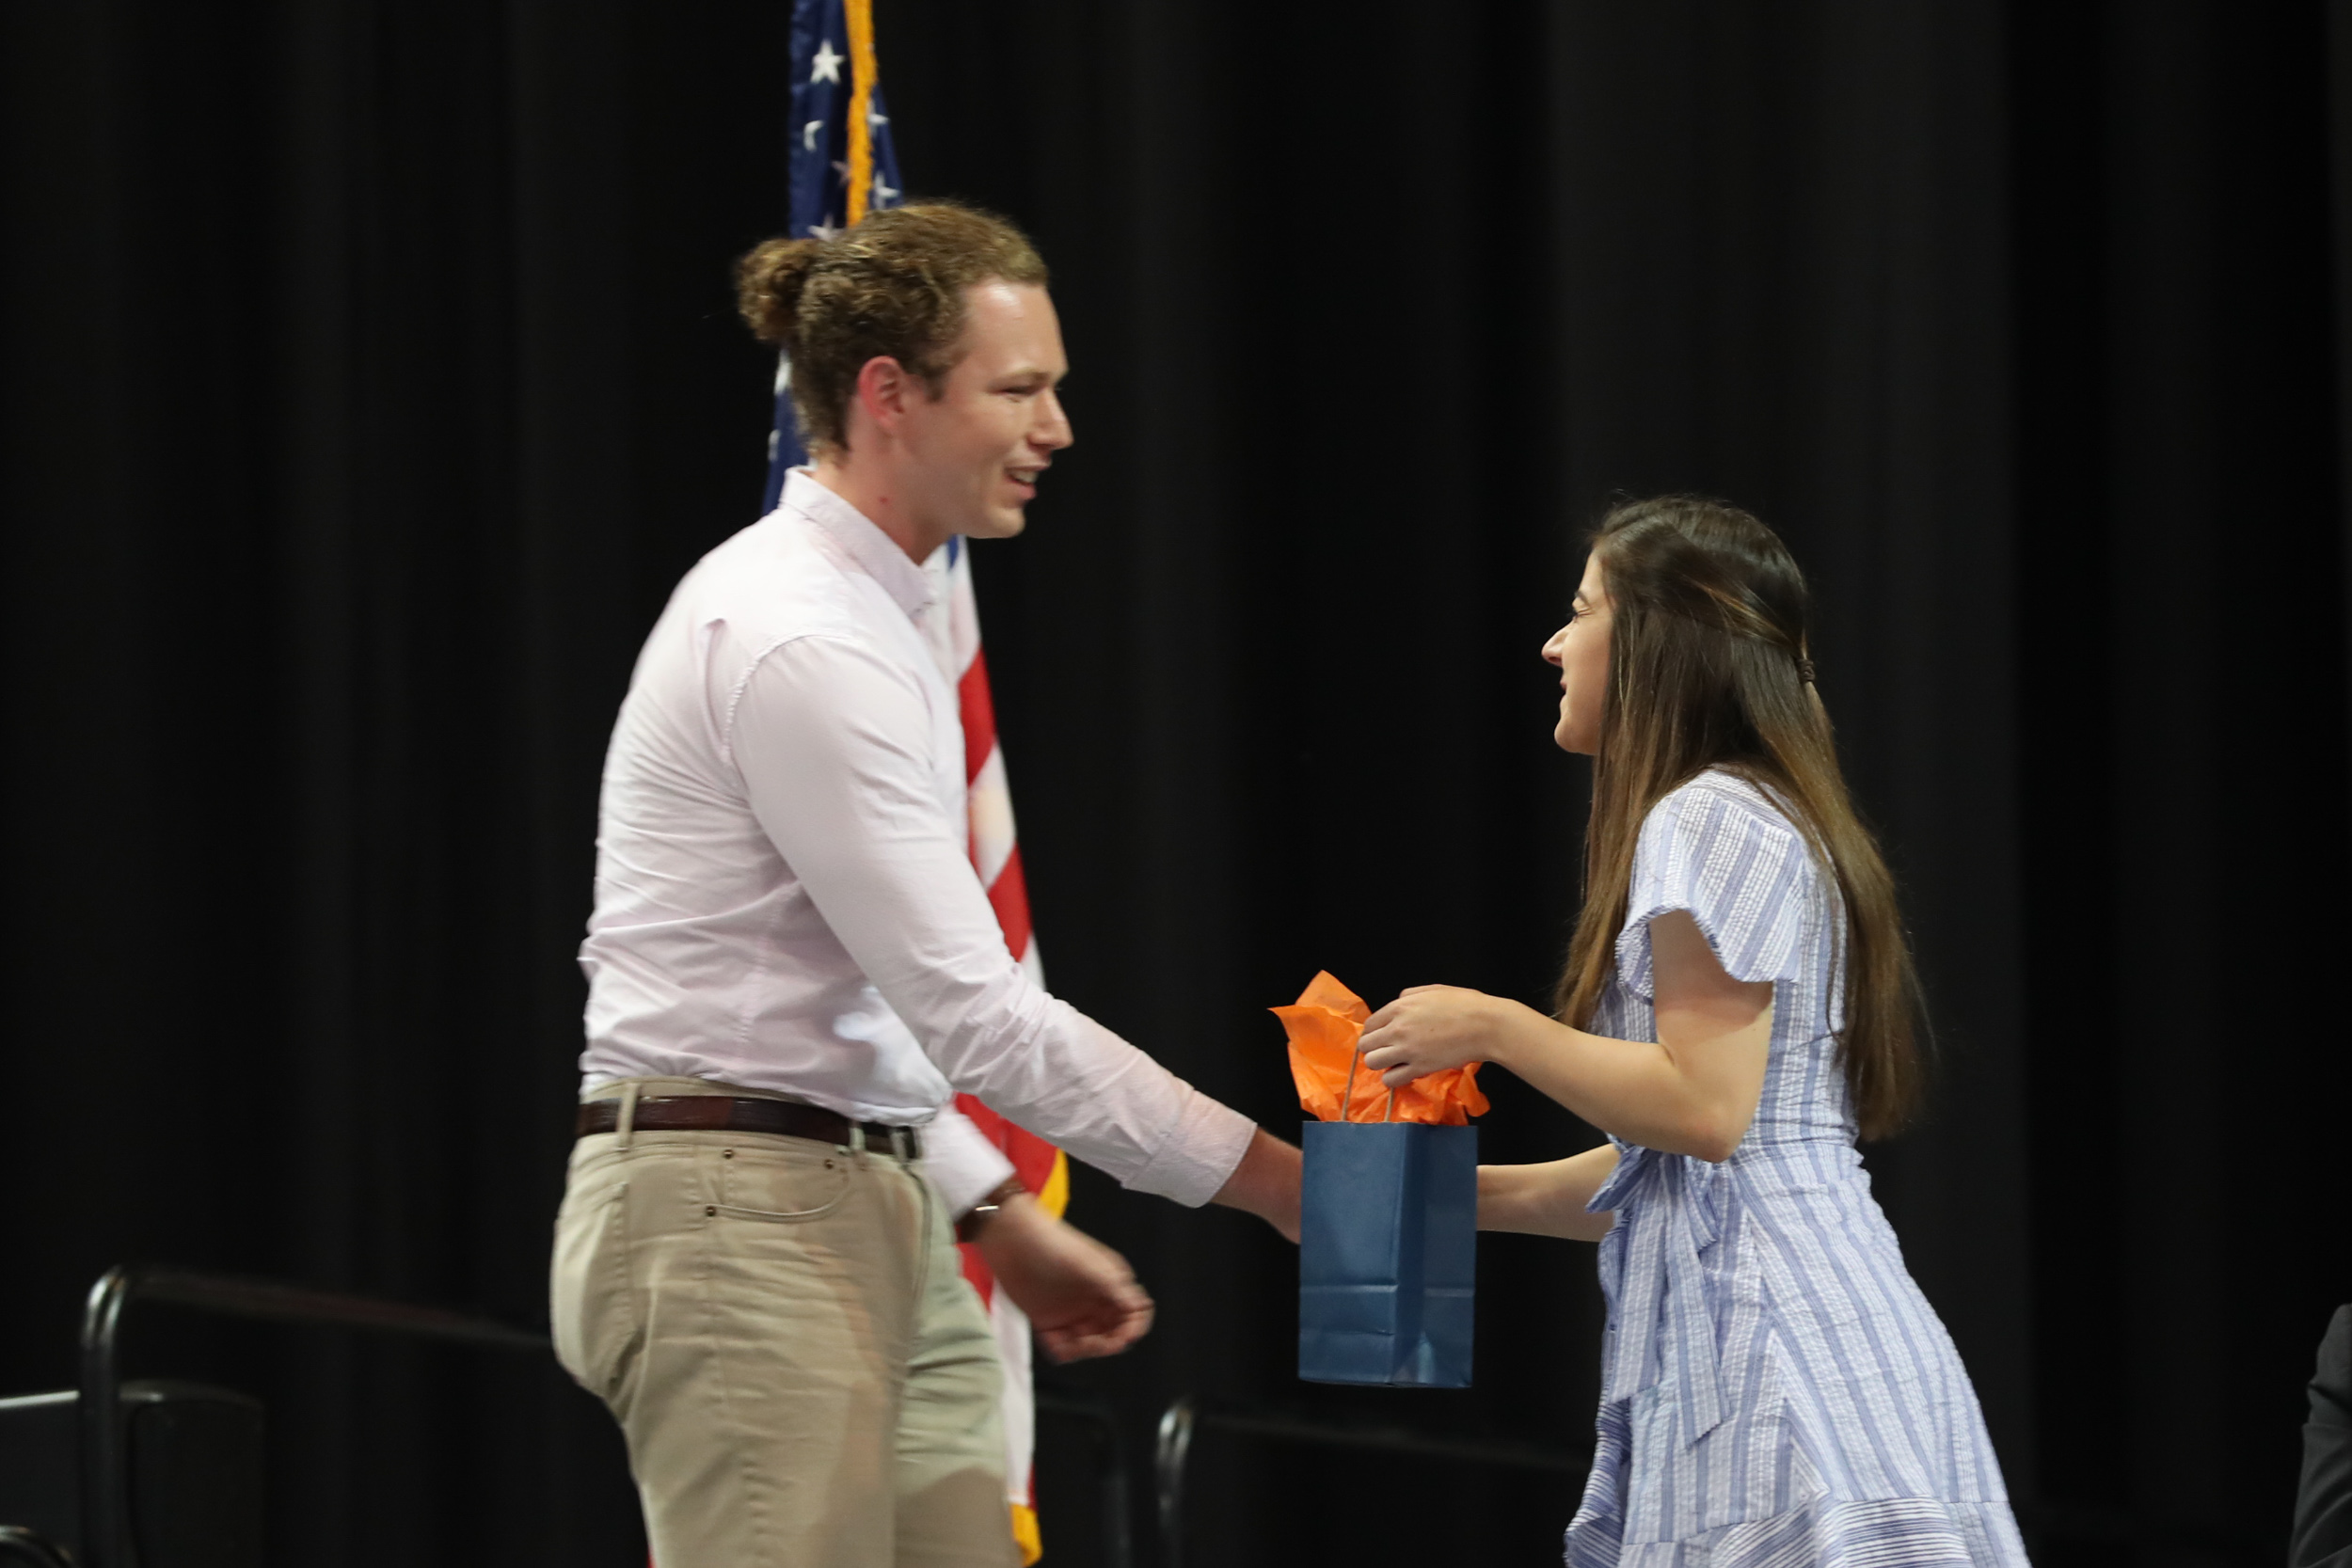 Austin Widner recieving a blue bag from a woman on stage